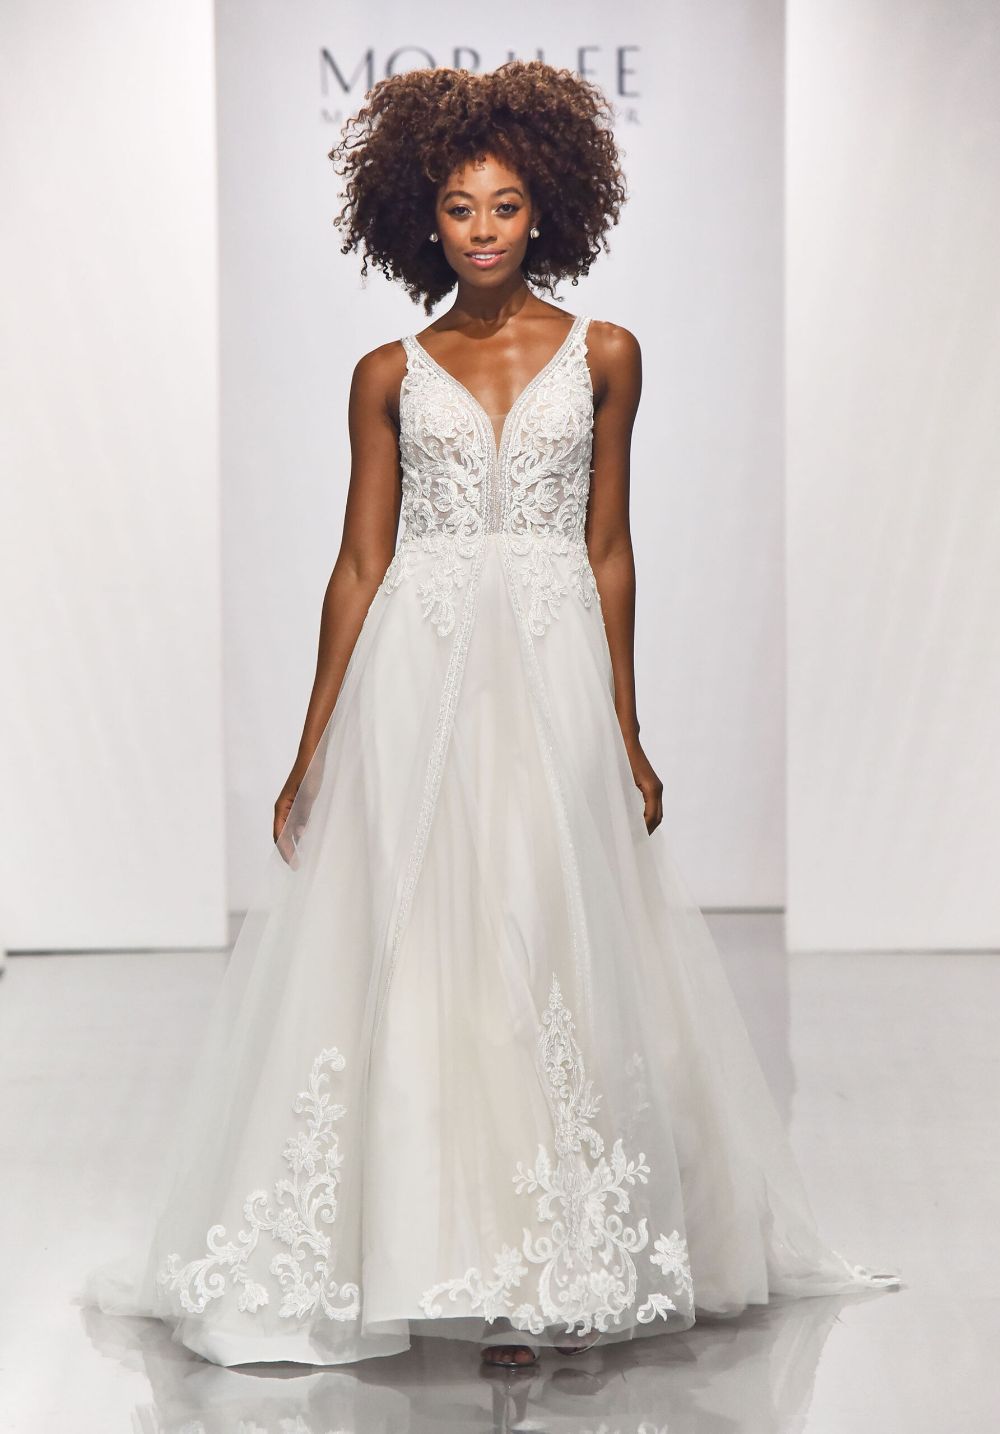 BRIELLE 2302 by Mori Lee by Madeline Gardner